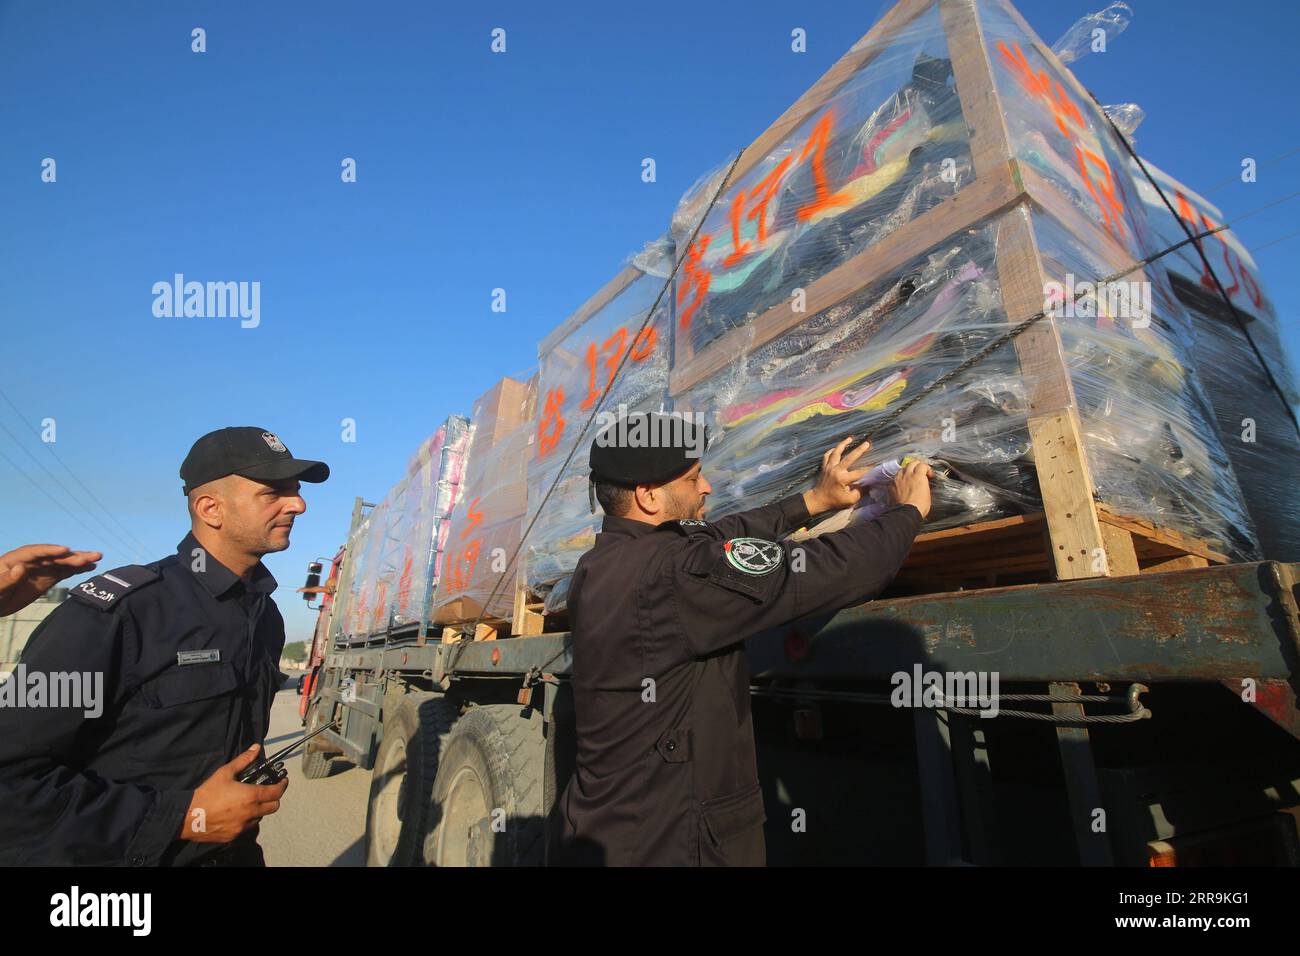 210621 -- RAFAH, June 21, 2021 -- A Palestinian police officer inspects clothes for export on a truck at the Kerem Shalom Crossing in the southern Gaza Strip city of Rafah, on June 21, 2021. Israel on Monday eased some restrictions imposed on the Gaza Strip crossings. Photo by /Xinhua MIDEAST-GAZA-RAFAH-KEREM SHALOM CROSSING KhaledxOmar PUBLICATIONxNOTxINxCHN Stock Photo